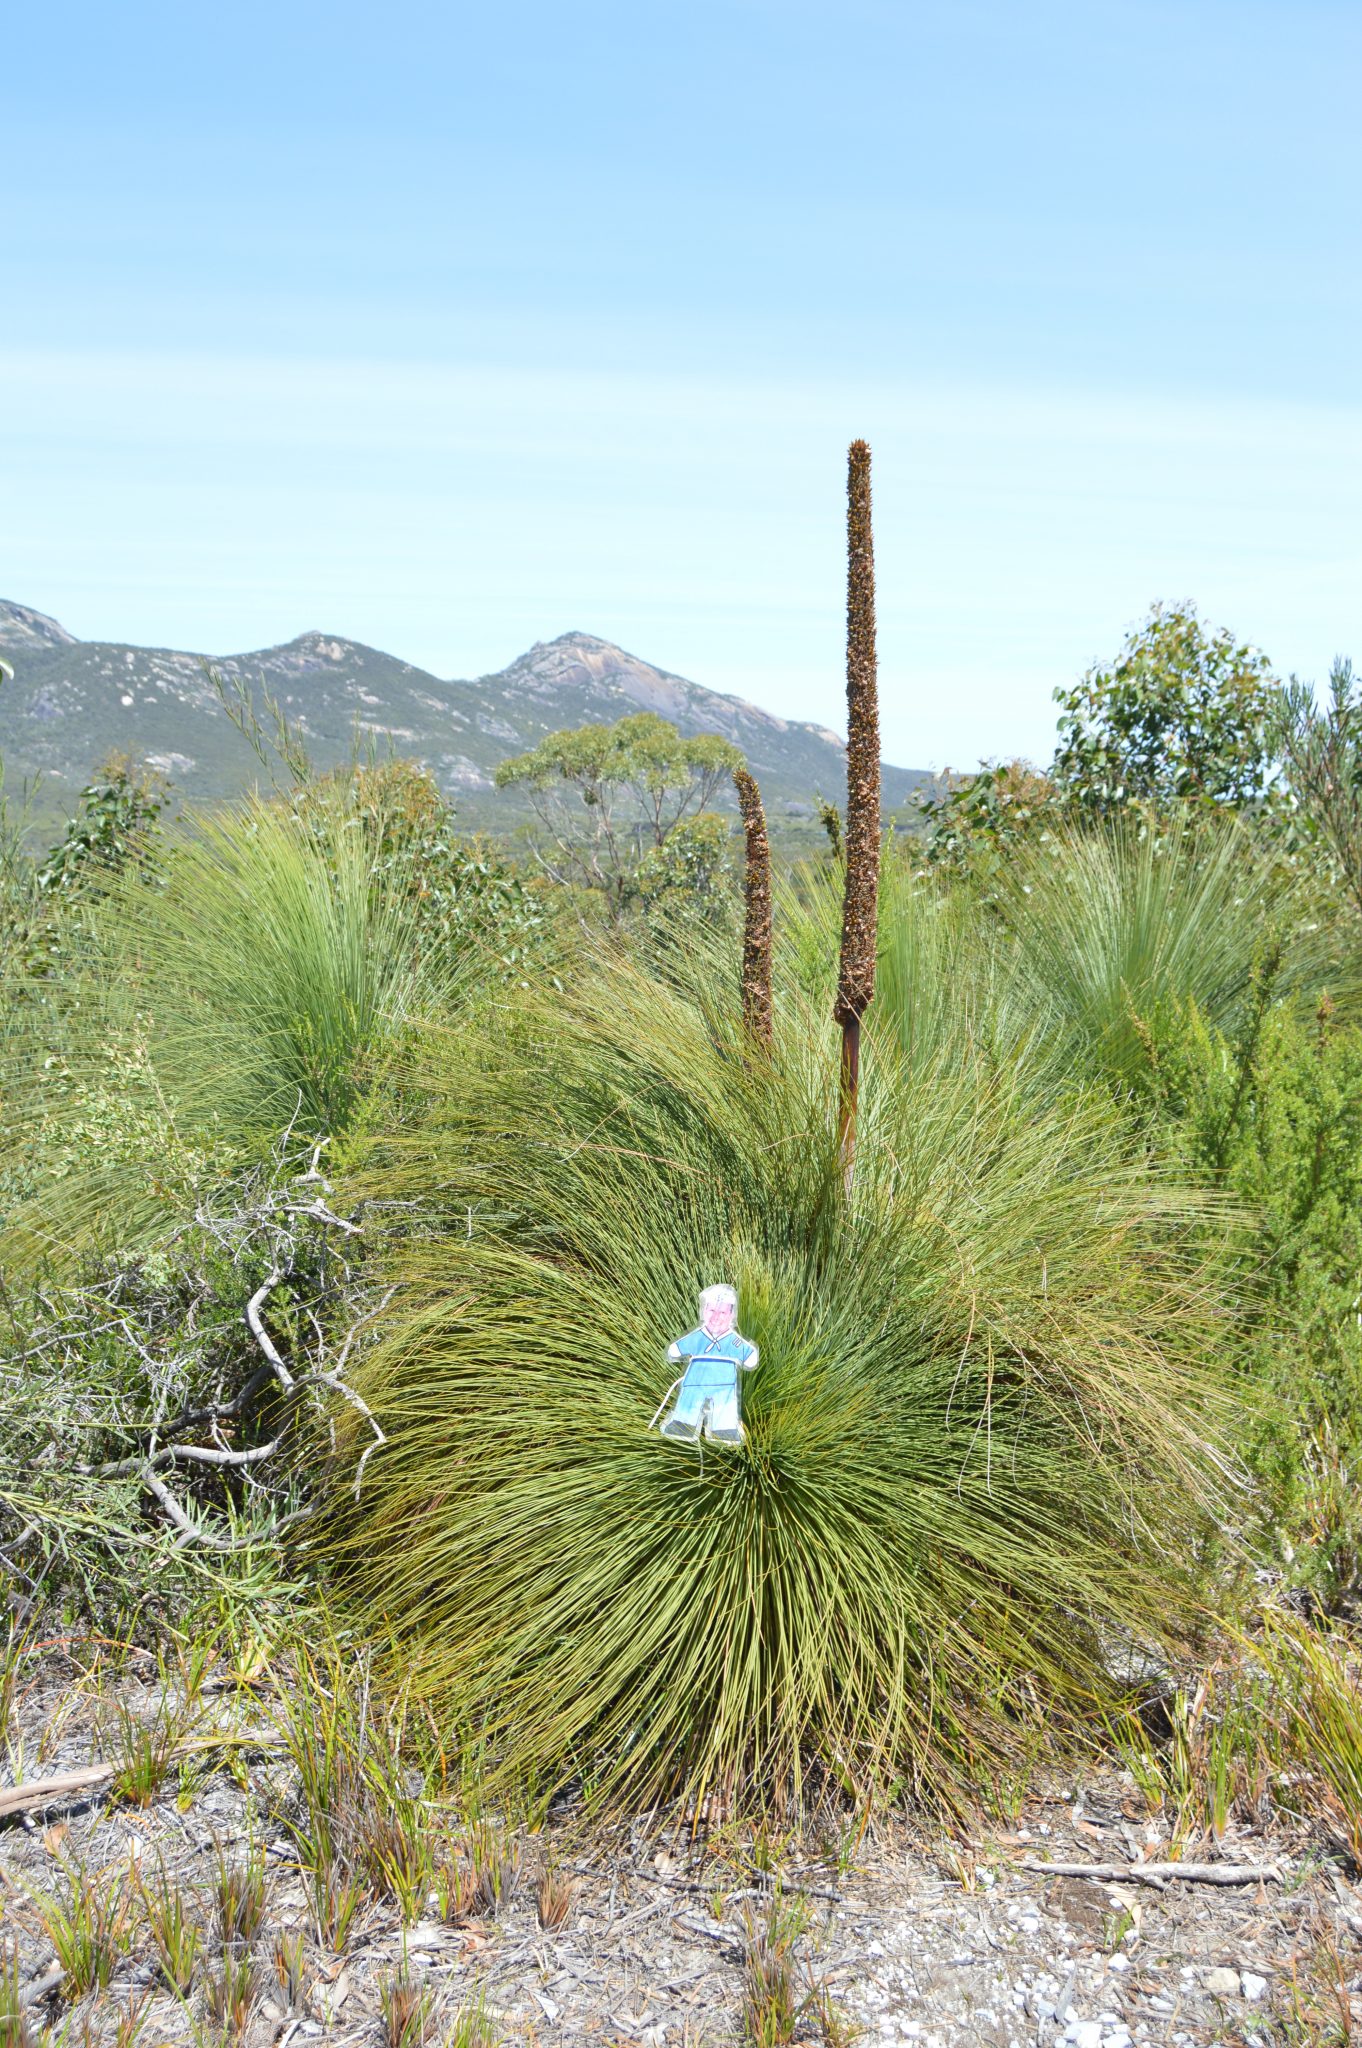 138. Flat Mr. Davis stands next to an Australian Grass Tree, the seeds of which, rainbow lorikeets like to eat. Victoria, Australia, December 2015. We saw Australian Grass Trees also o